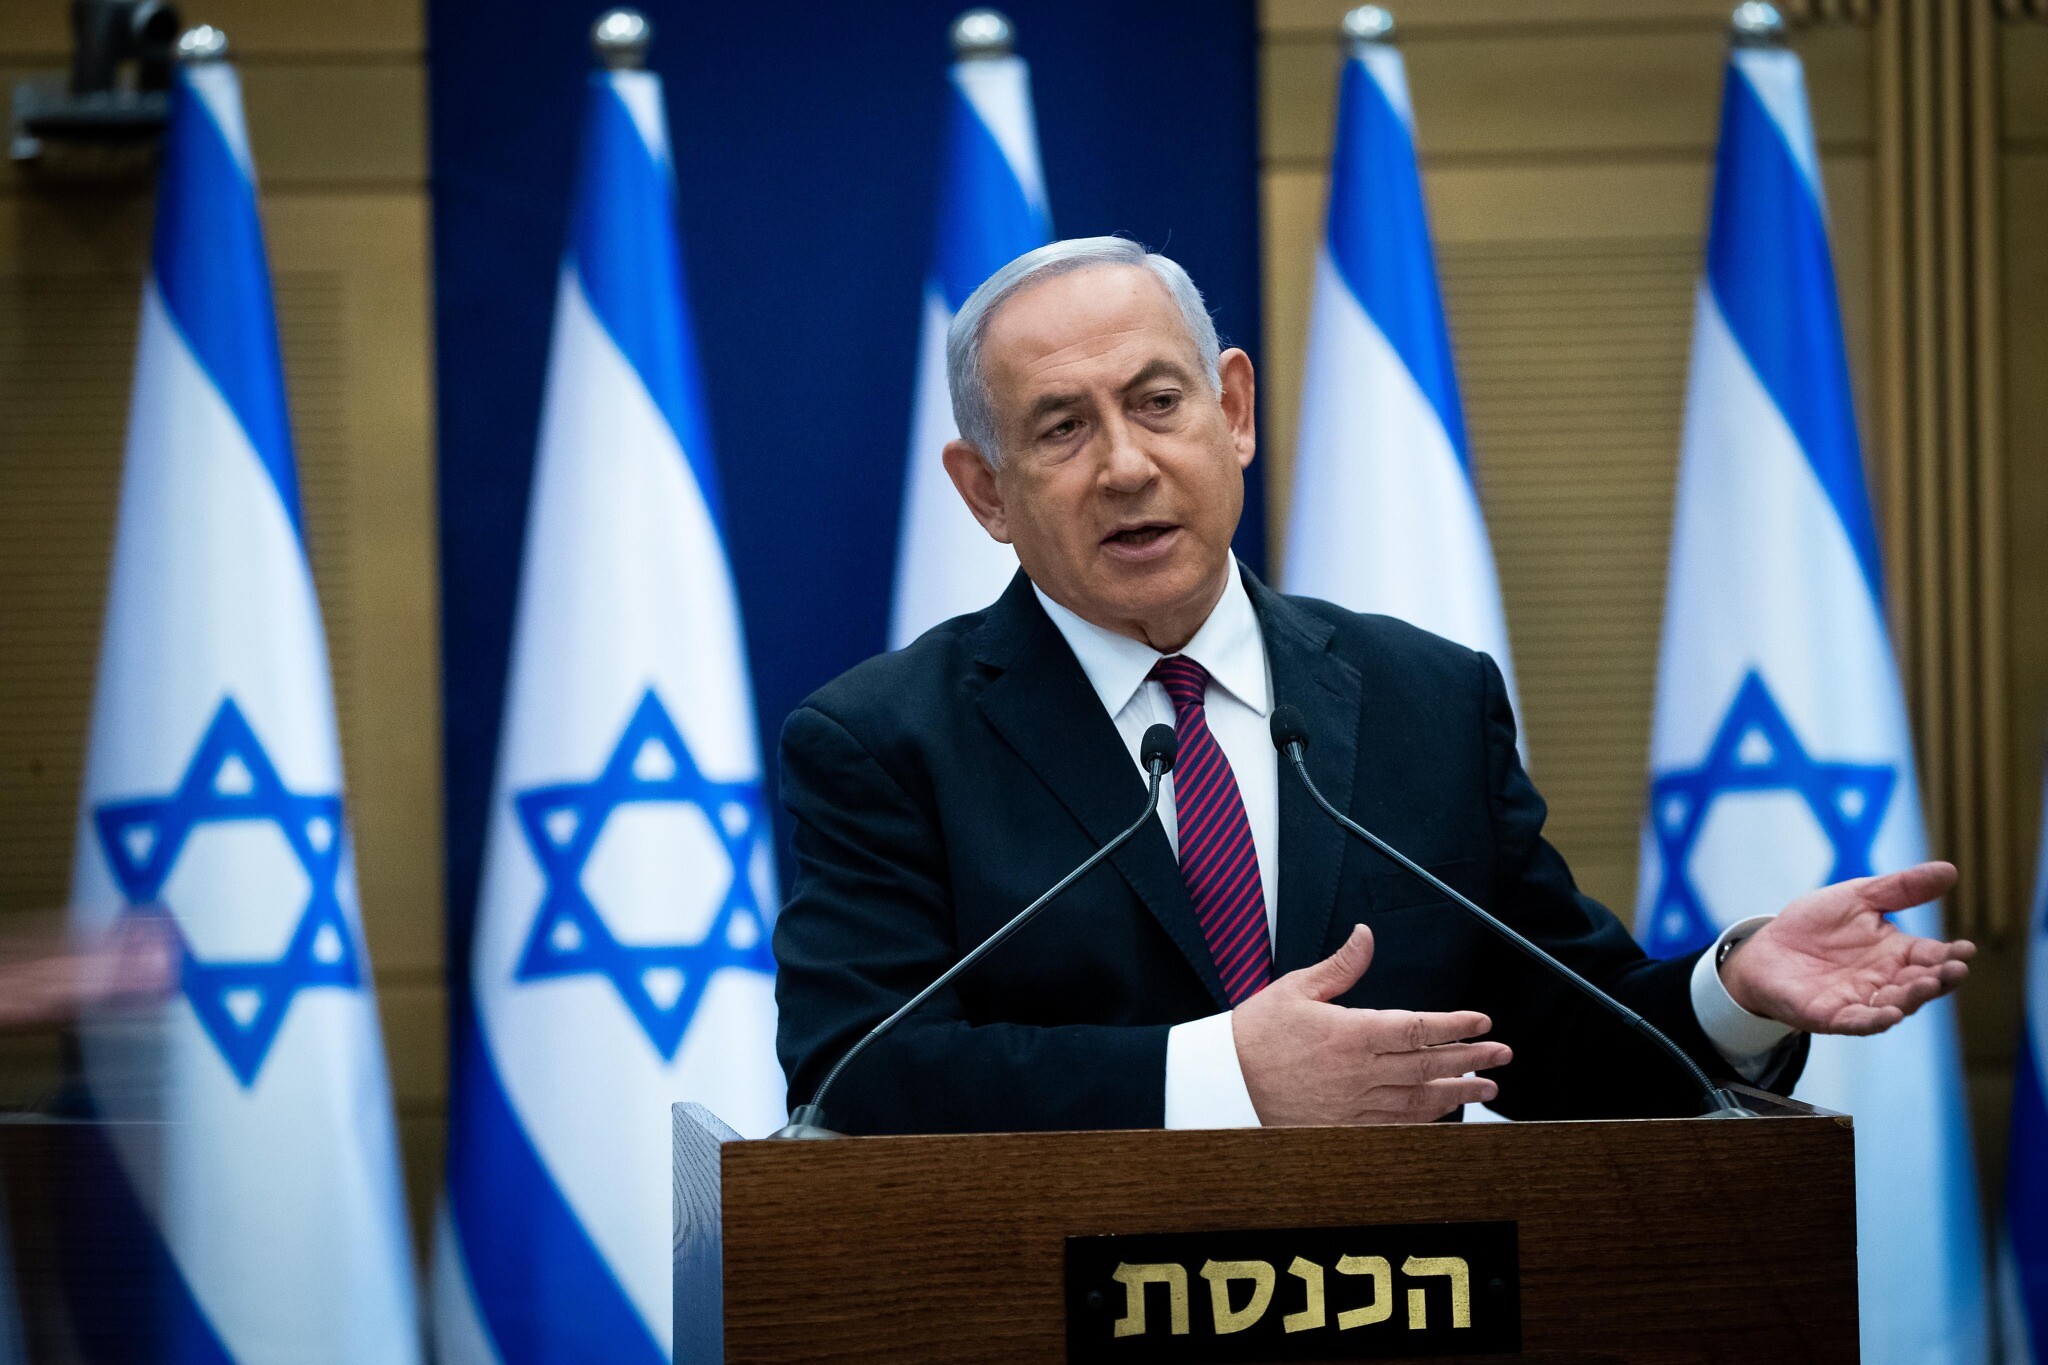 Netanyahu said planning new aid to small businesses ahead of election | The  Times of Israel